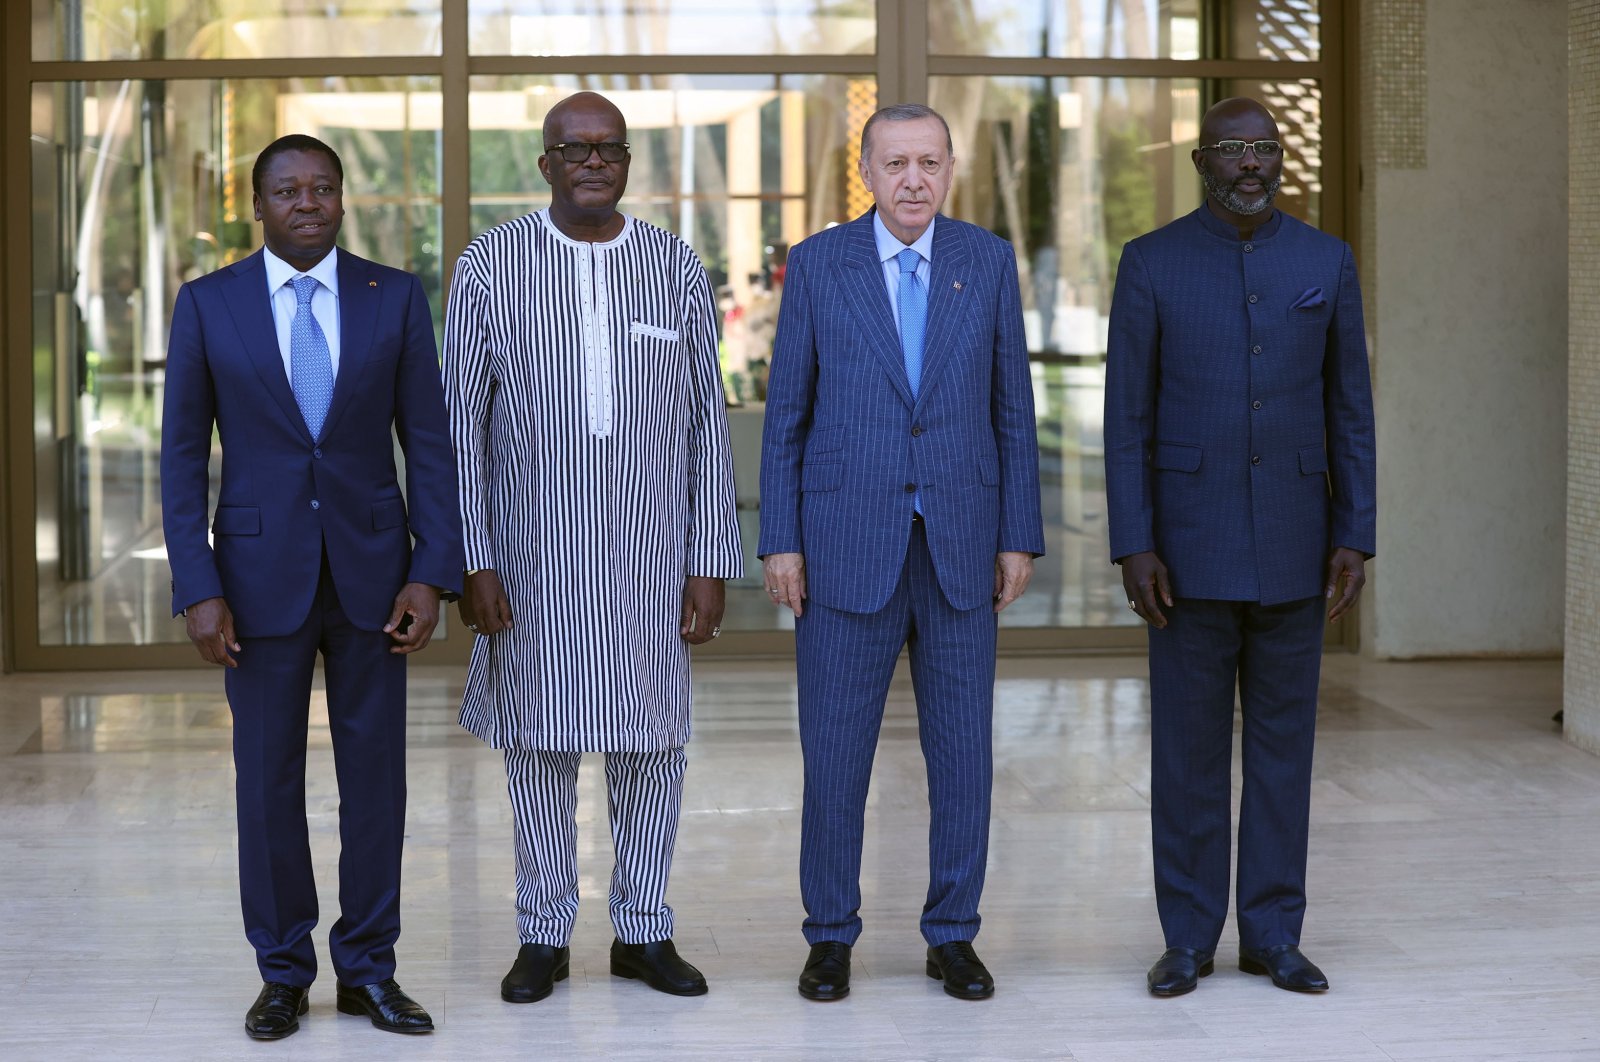 President Recep Tayyip Erdoğan (2R), Togo President Faure Gnassingbe (L), Burkina Faso President Christian Kabore (2L) and Liberia President George Weah pose for a picture ahead of a working dinner, in Lome, Togo, Oct. 19, 2021. (AA Photo)